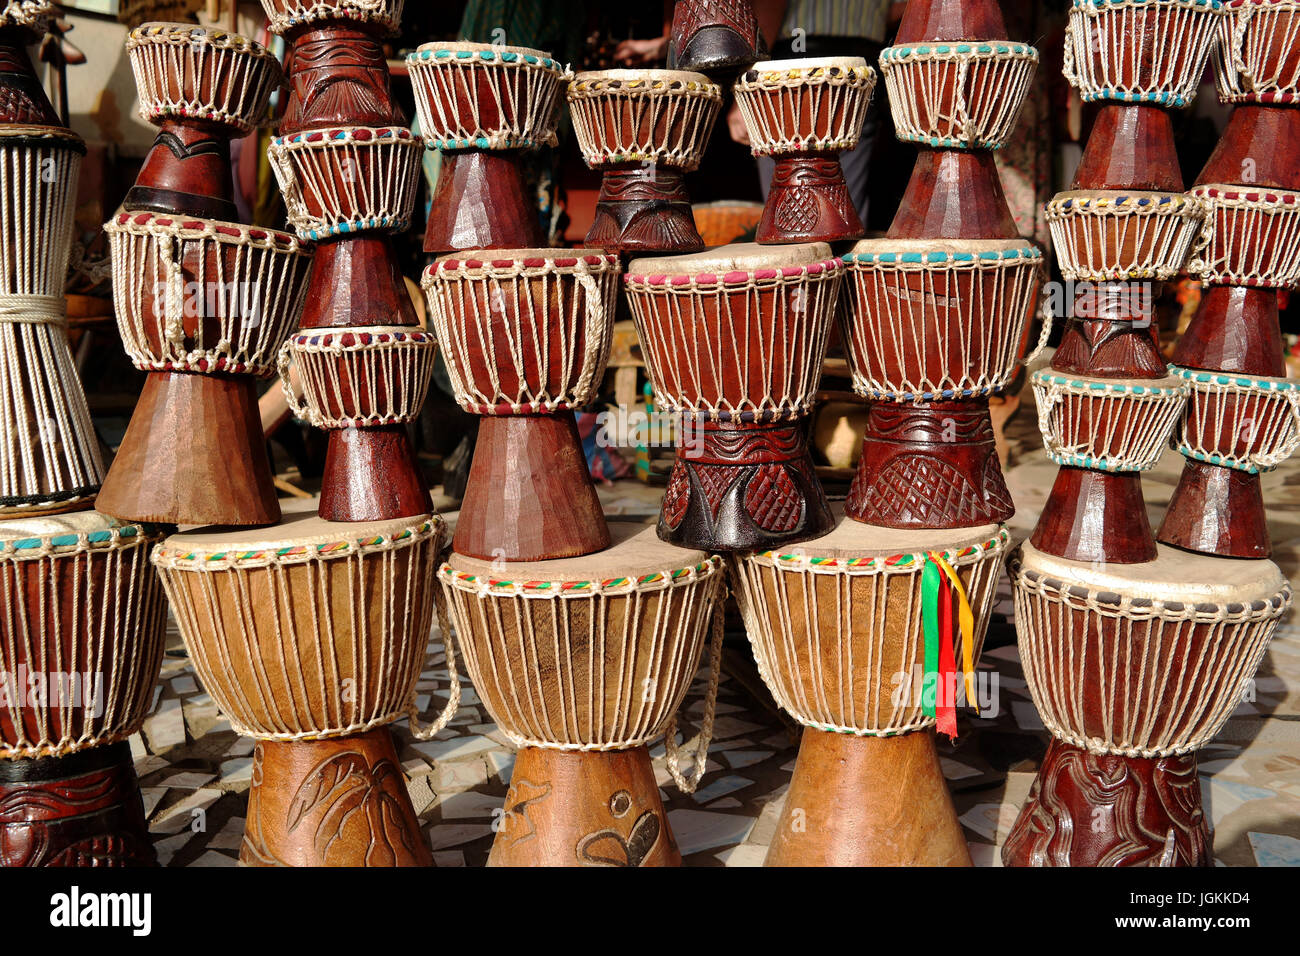 African drums for sale, The Gambia, West Africa Stock Photo